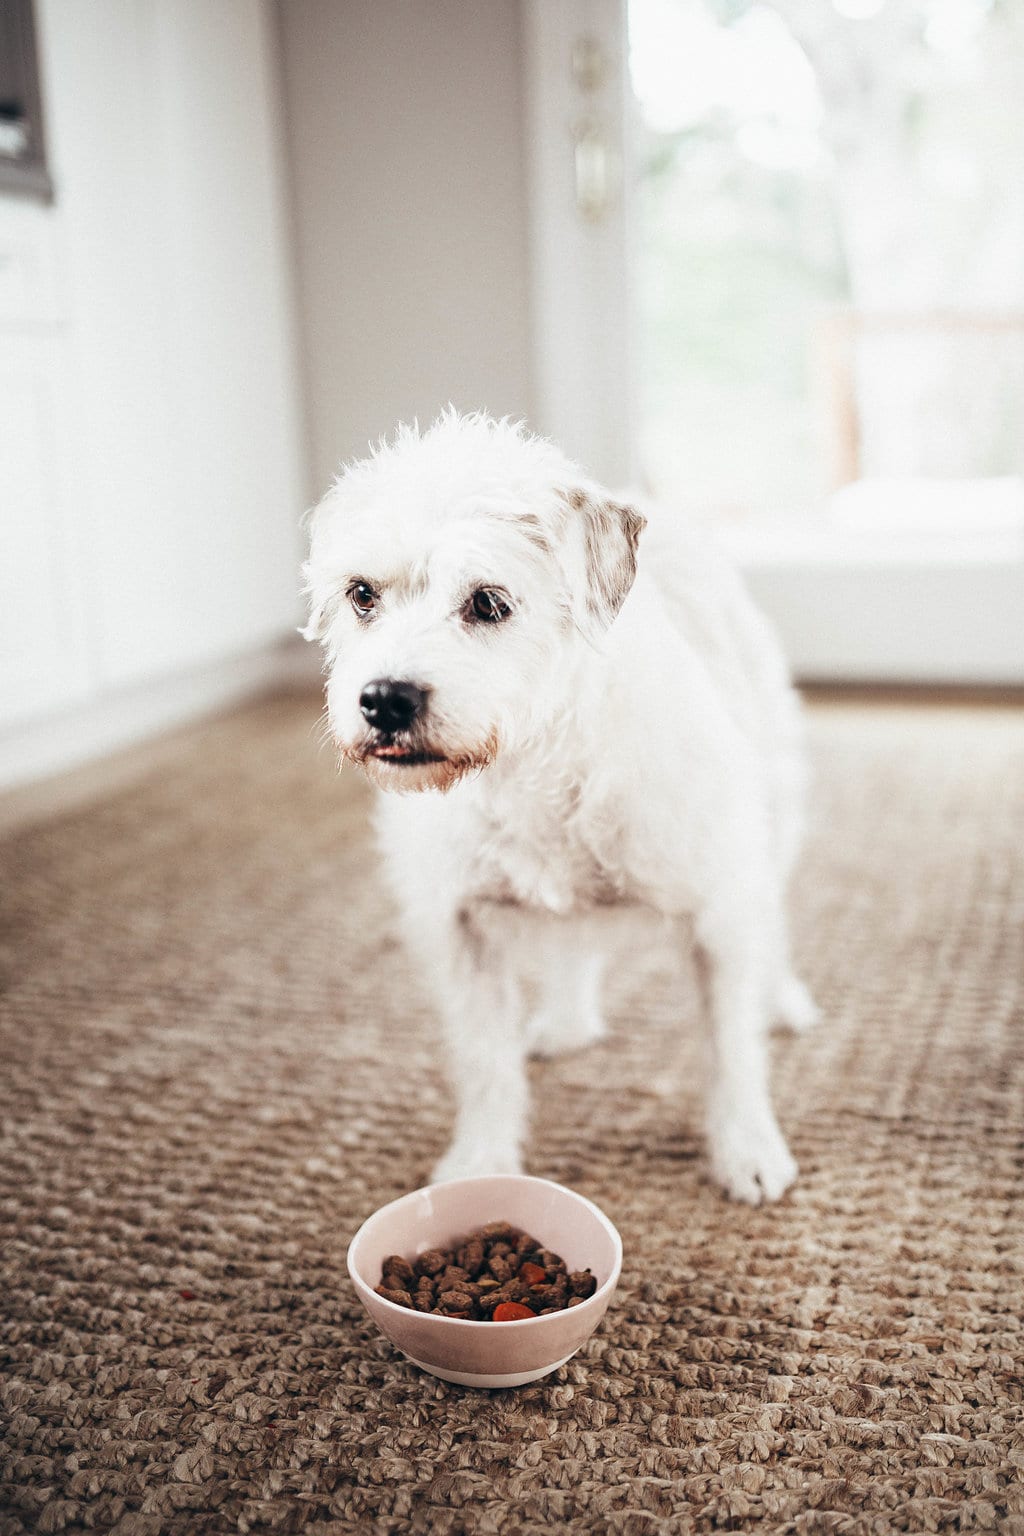 Freshpet - LOLA'S ADOPTION STORY AND HER FAVORITE FOOD: FRESHPET by popular San Francisco lifestyle blogger, Just Add Glam